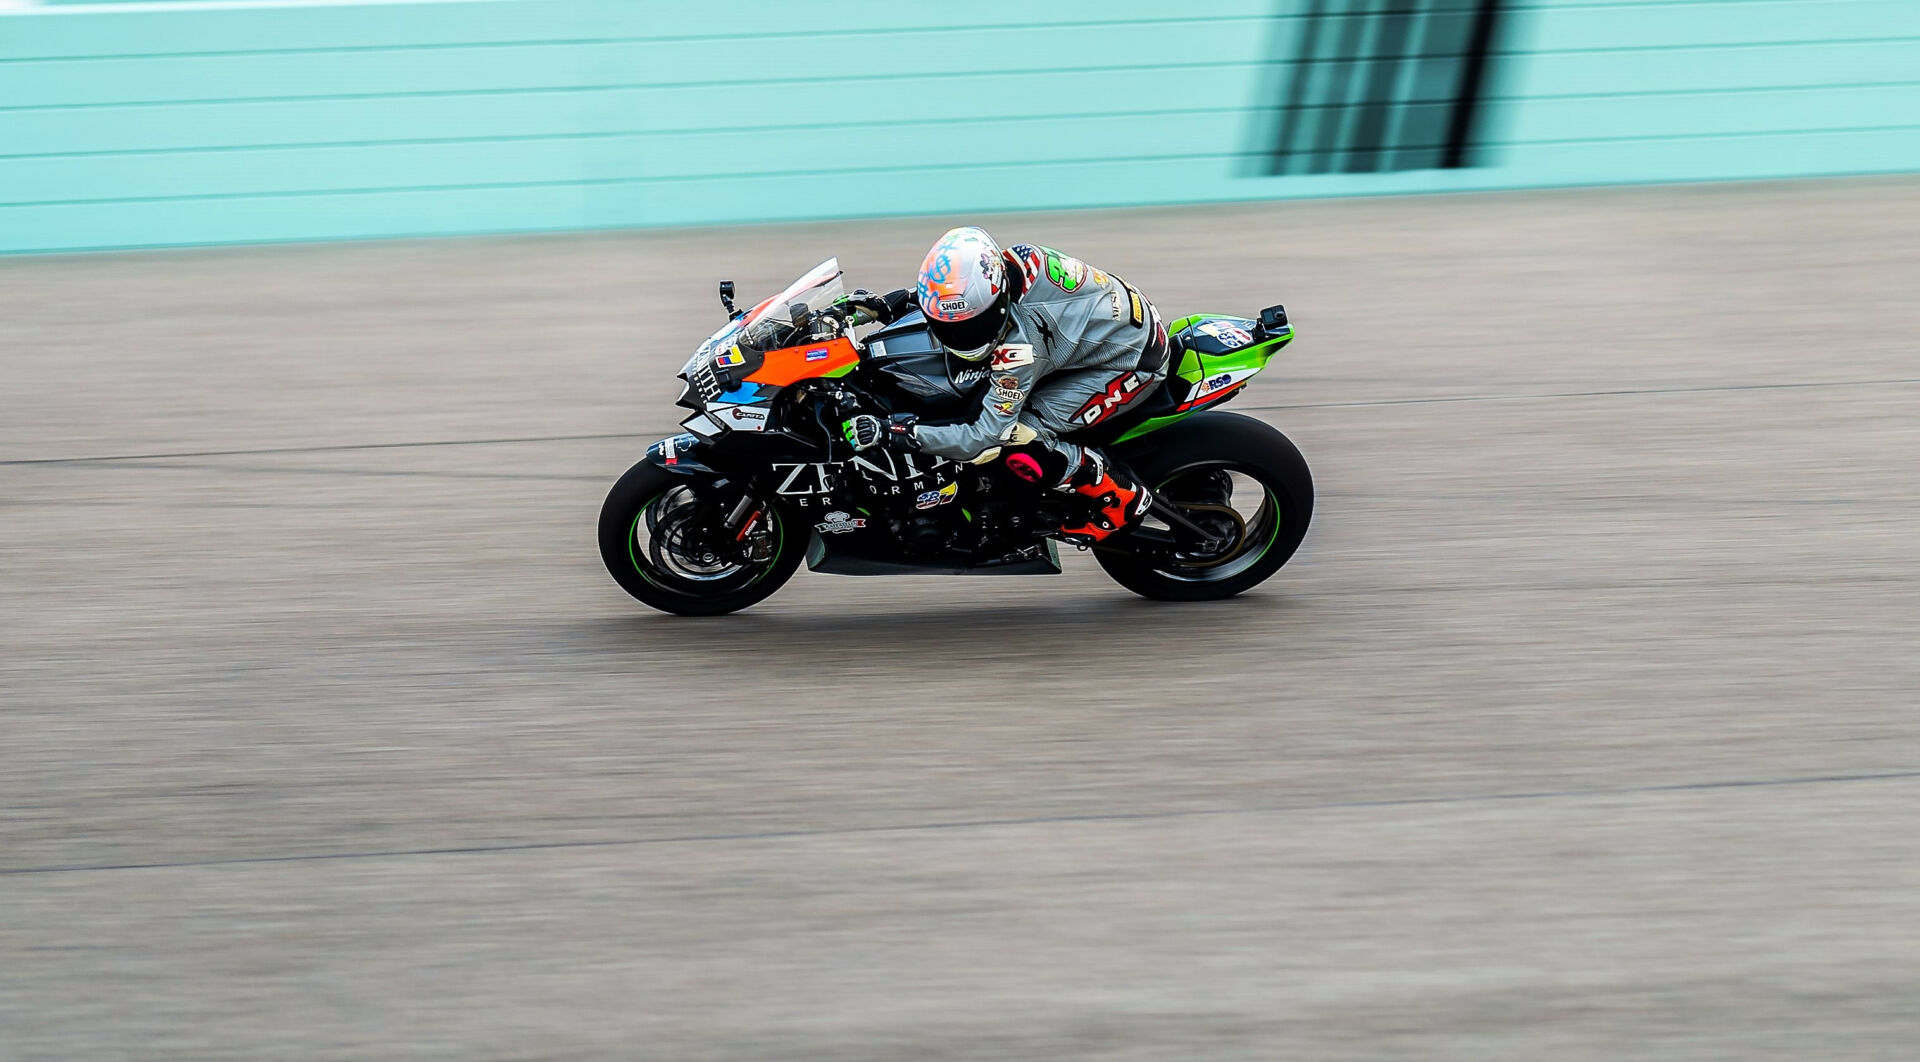 Stefano Mesa (37). Photo by Phenry Photography, courtesy PanAmerican Superbike.